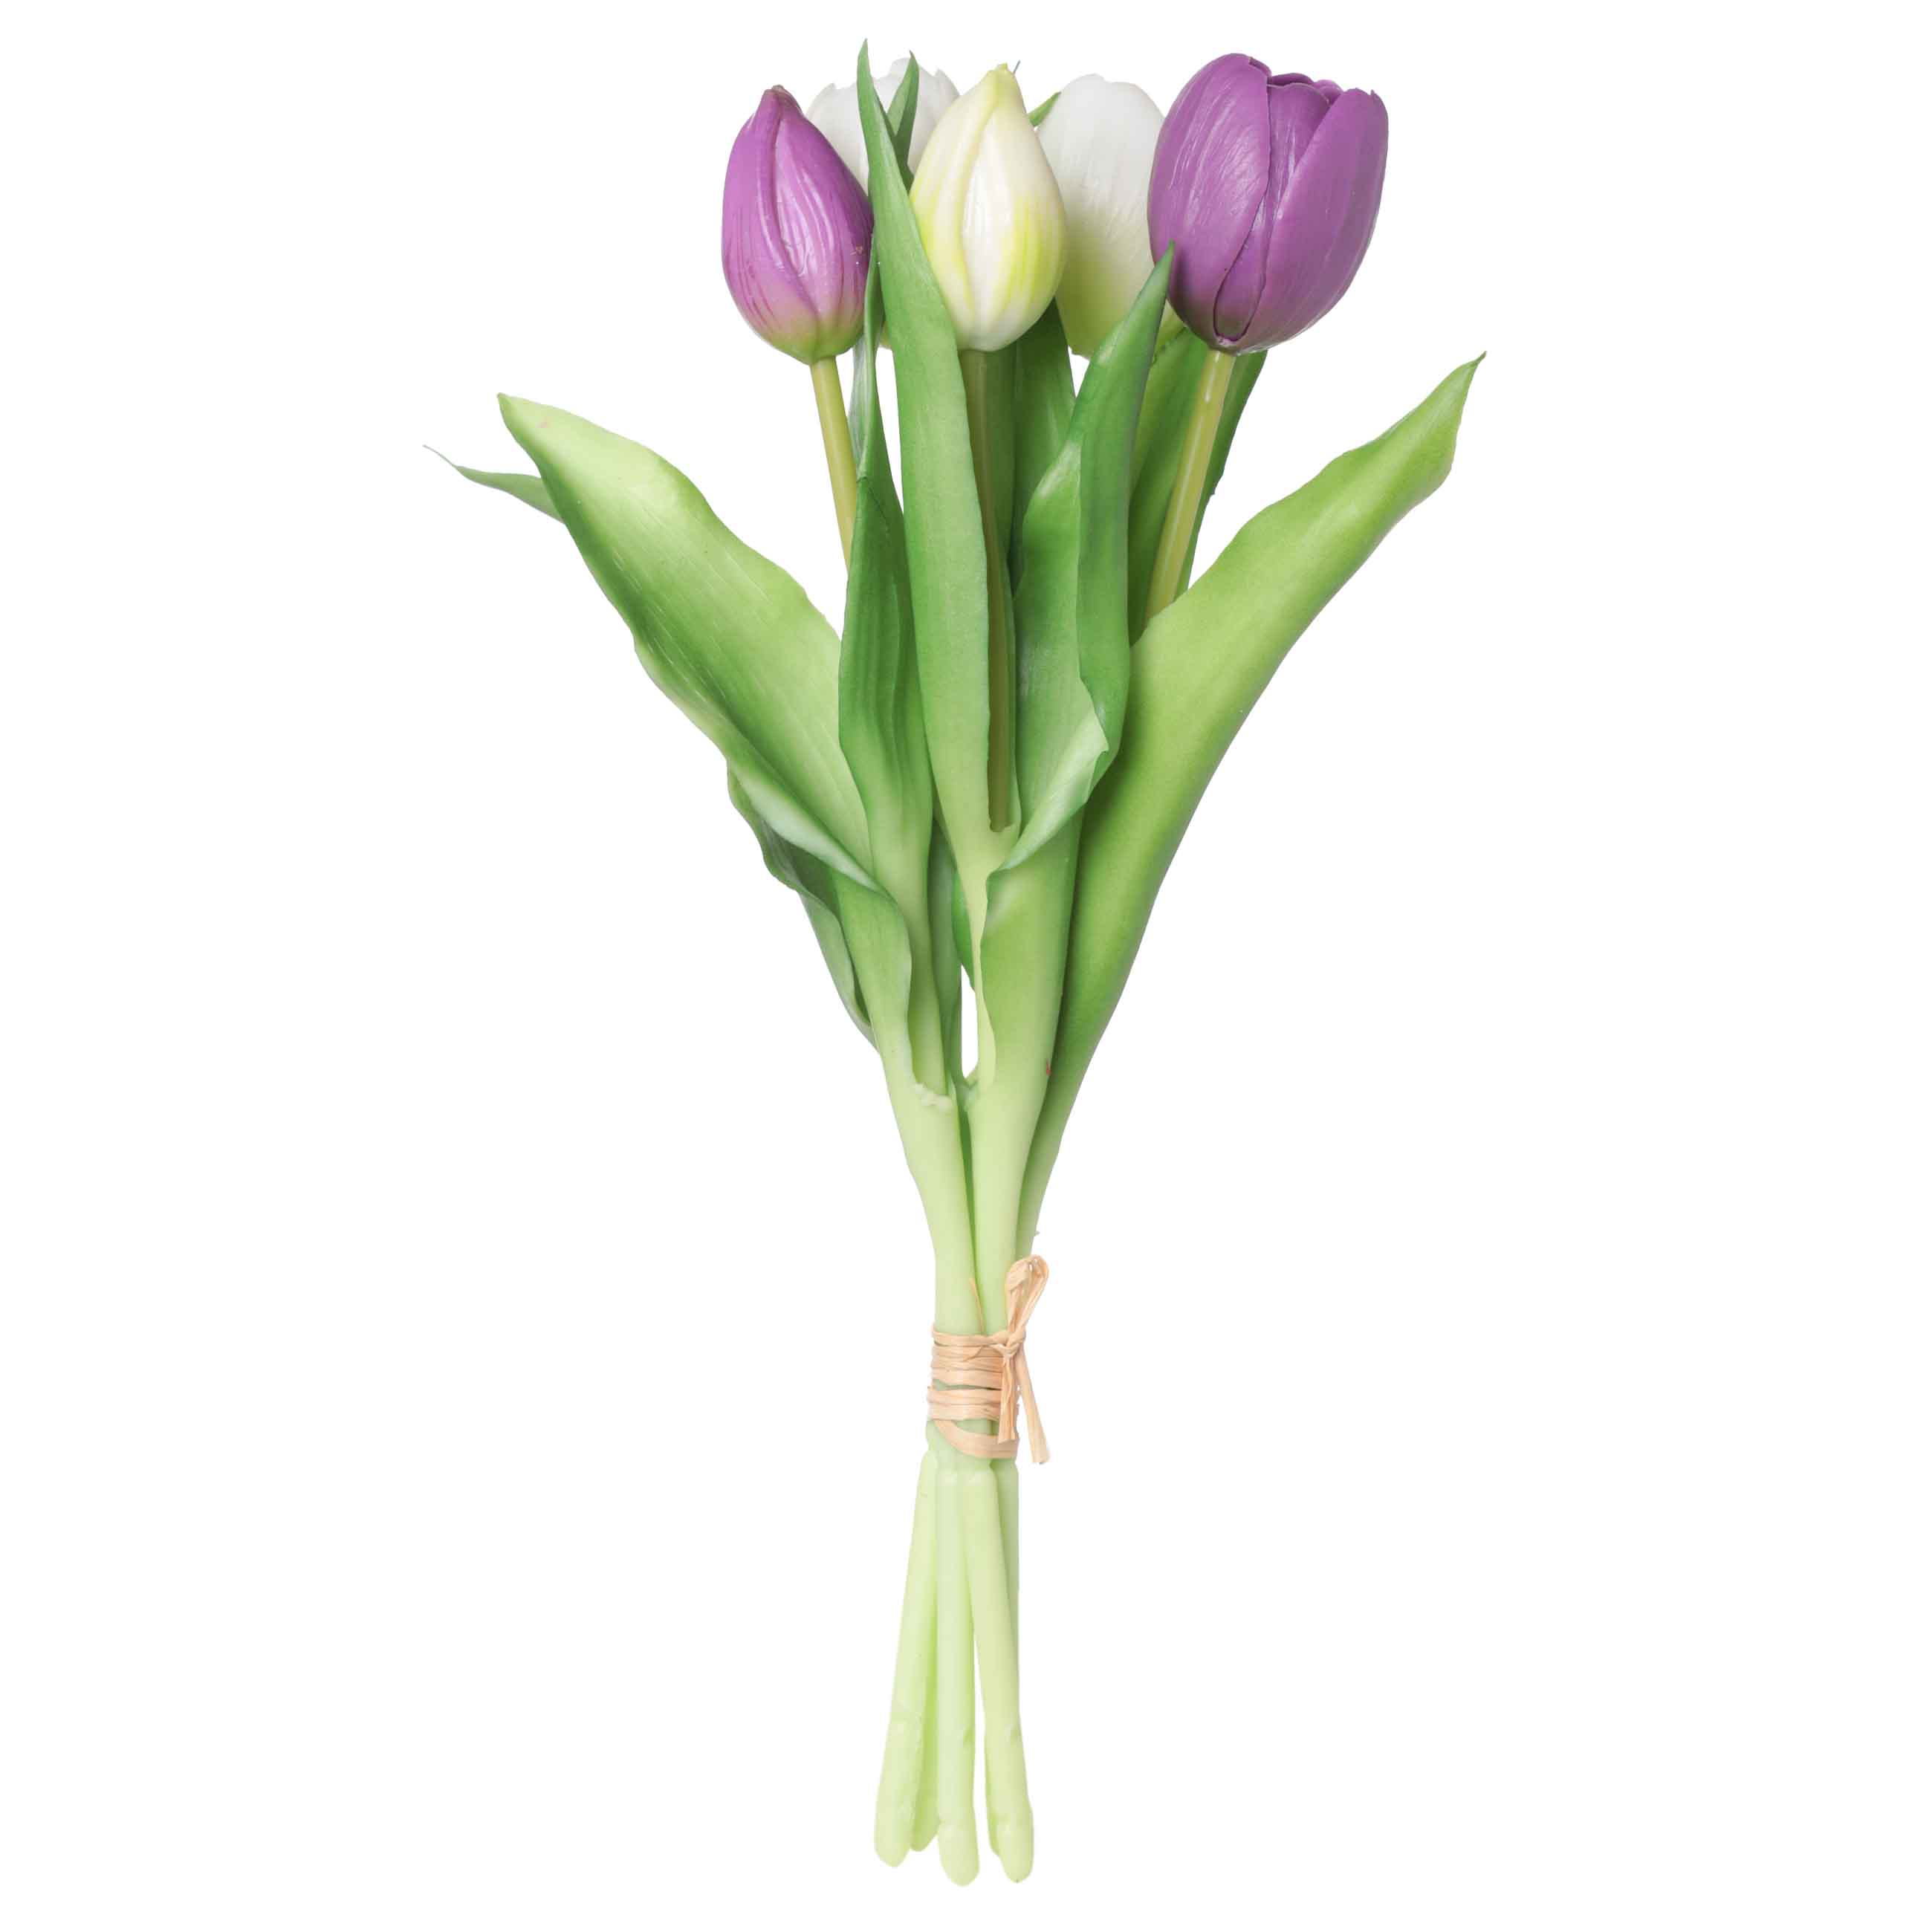 Decorative bouquet, 29 cm, packed, TEP / paper, Purple and white tulips, Tulip garden изображение № 2